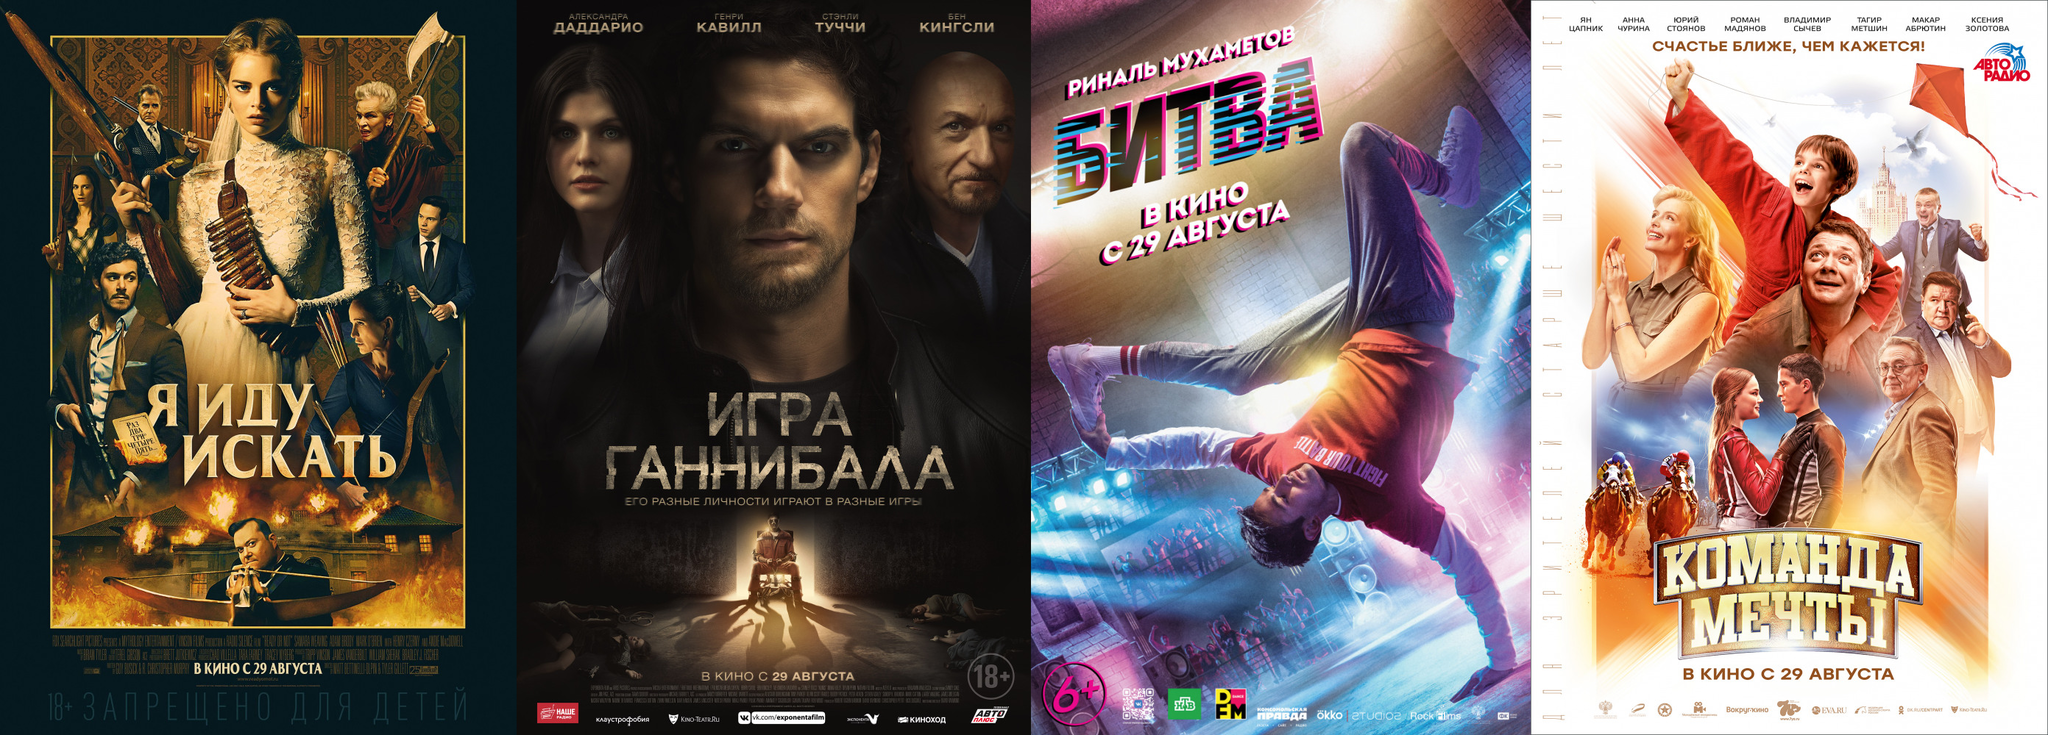 Russian box office receipts and distribution of screenings over the past weekend (August 29 - September 1) - Movies, Box office fees, Film distribution, I go looking